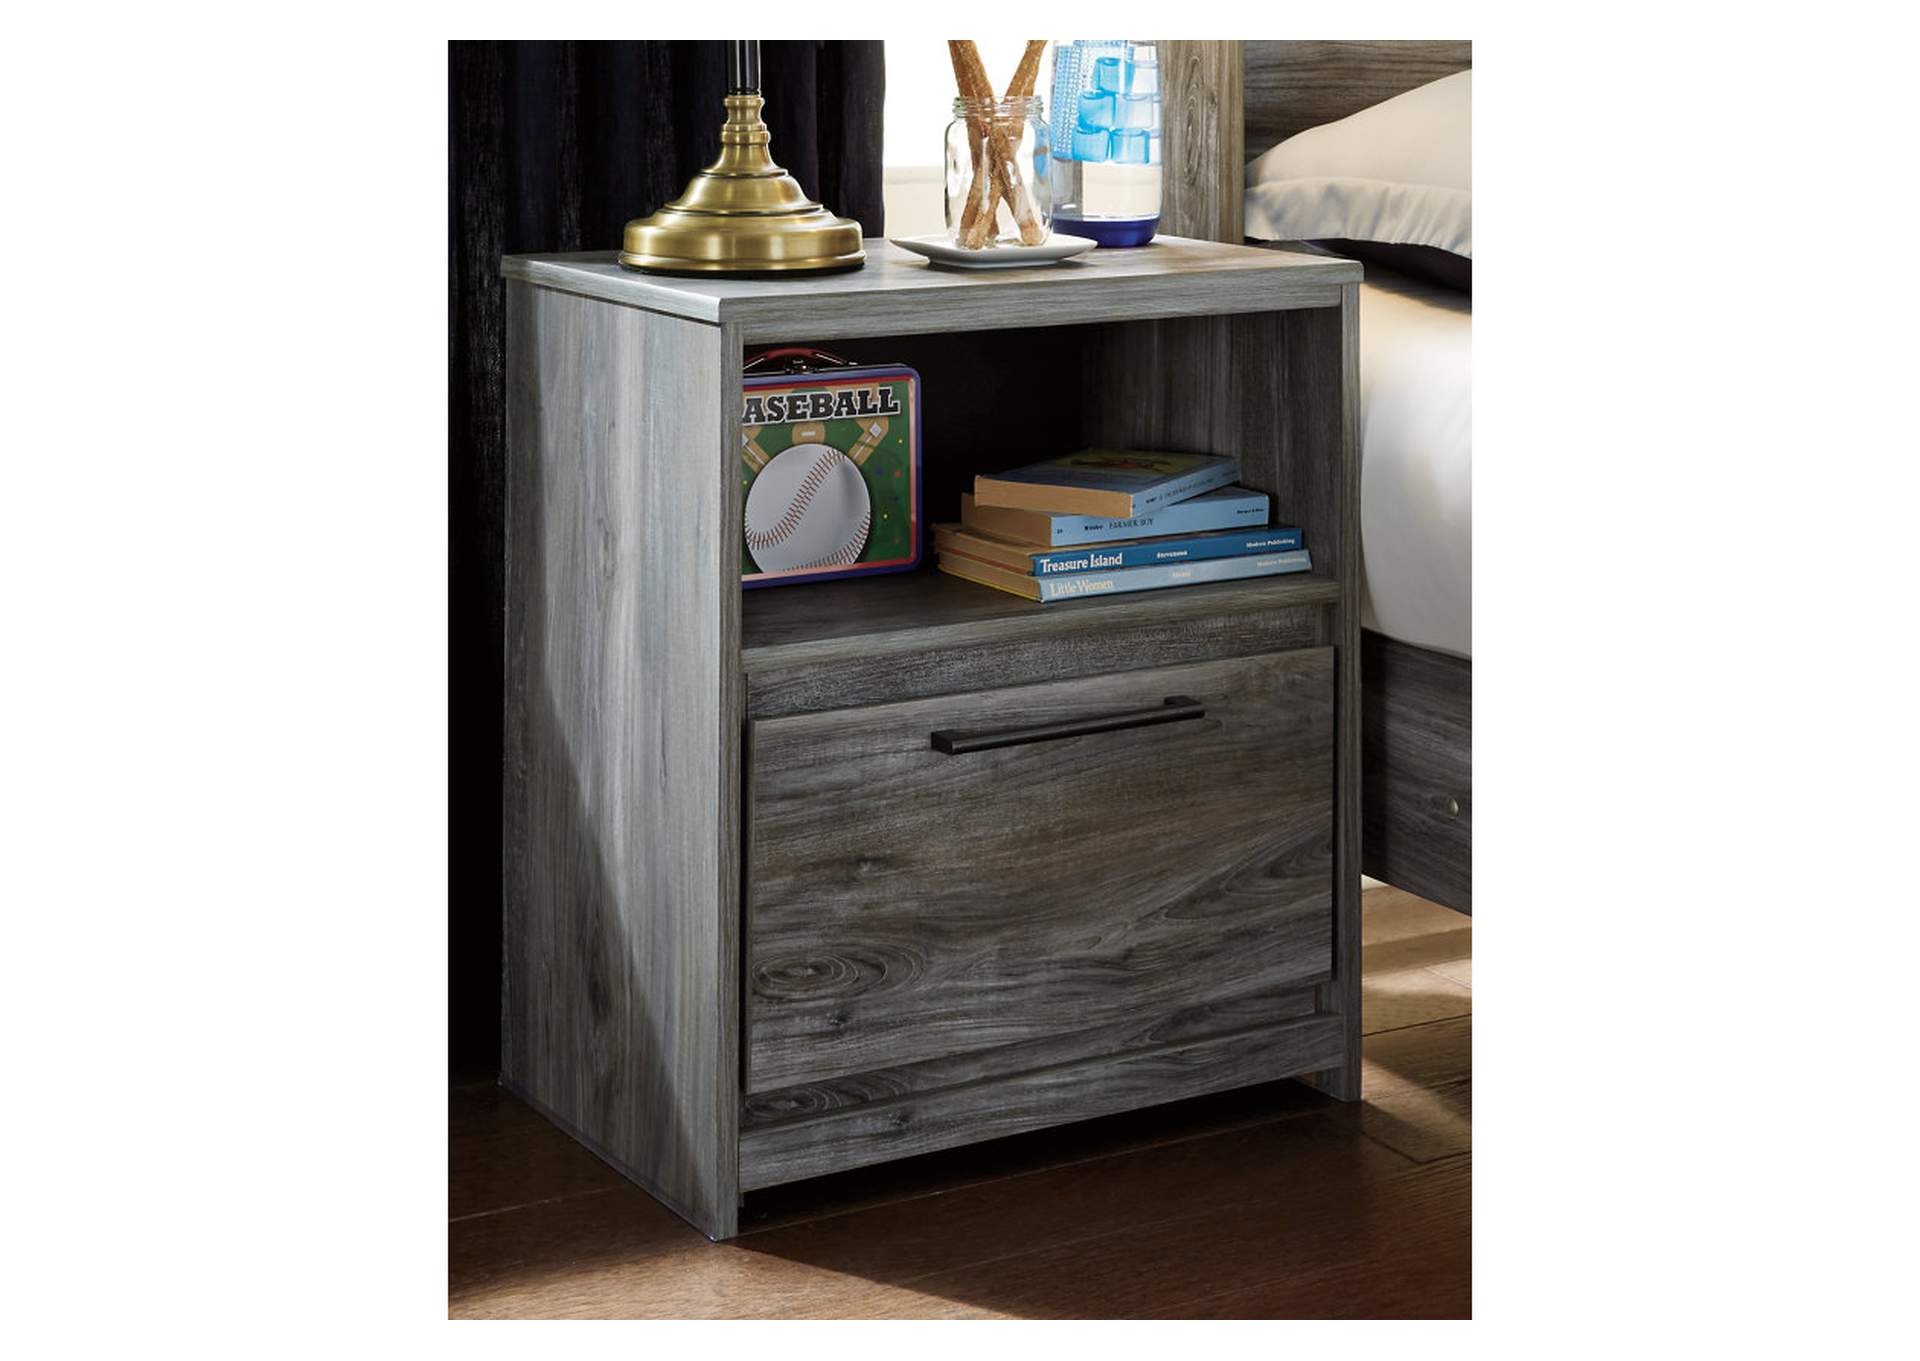 Baystorm King Panel Bed with Mirrored Dresser and 2 Nightstands,Signature Design By Ashley